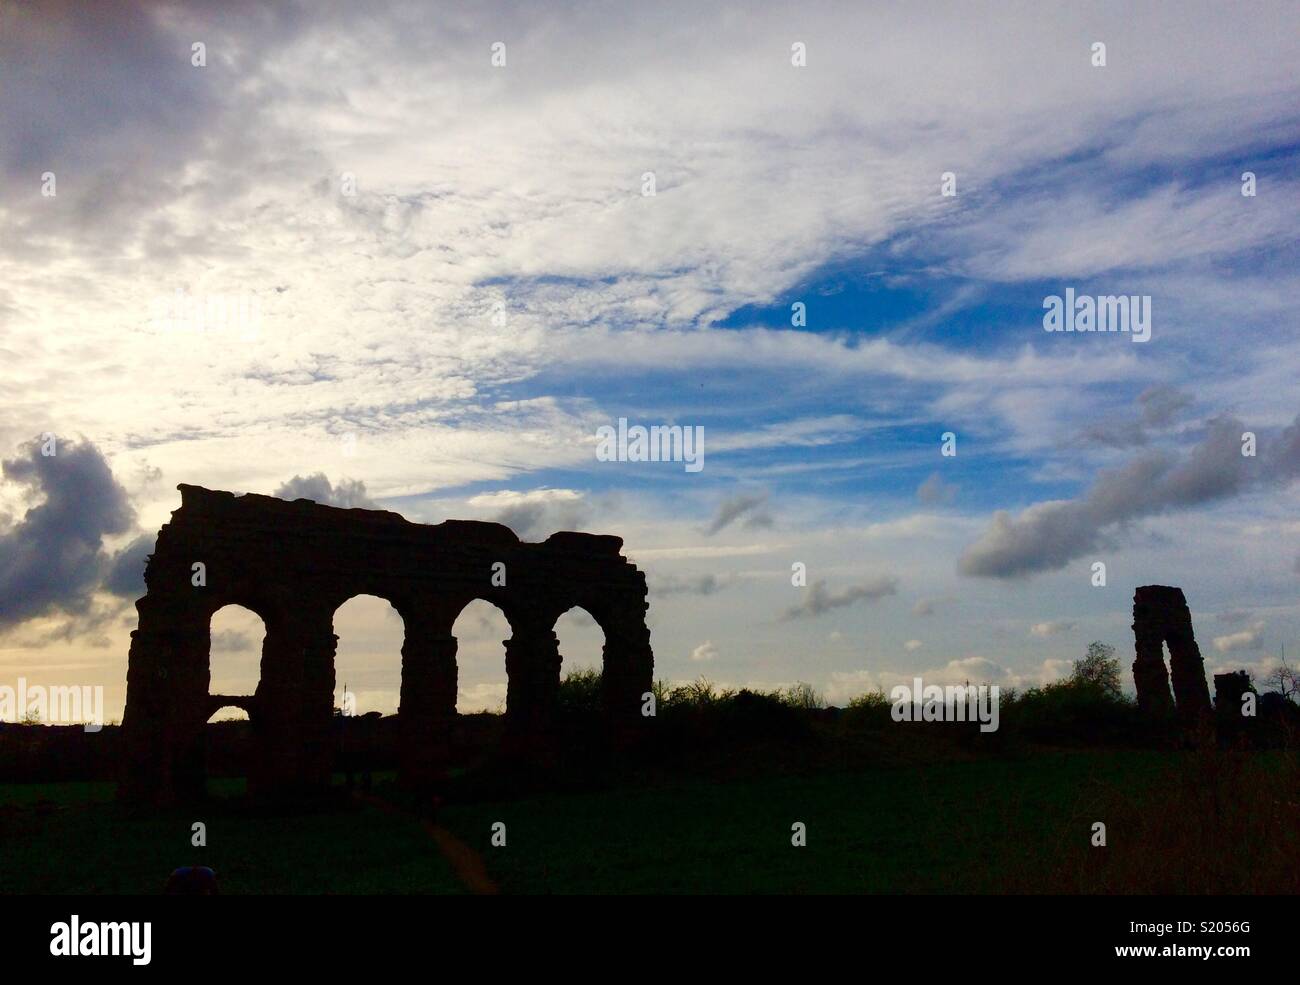 Silhouette of the ancient Rome aqueducts Stock Photo